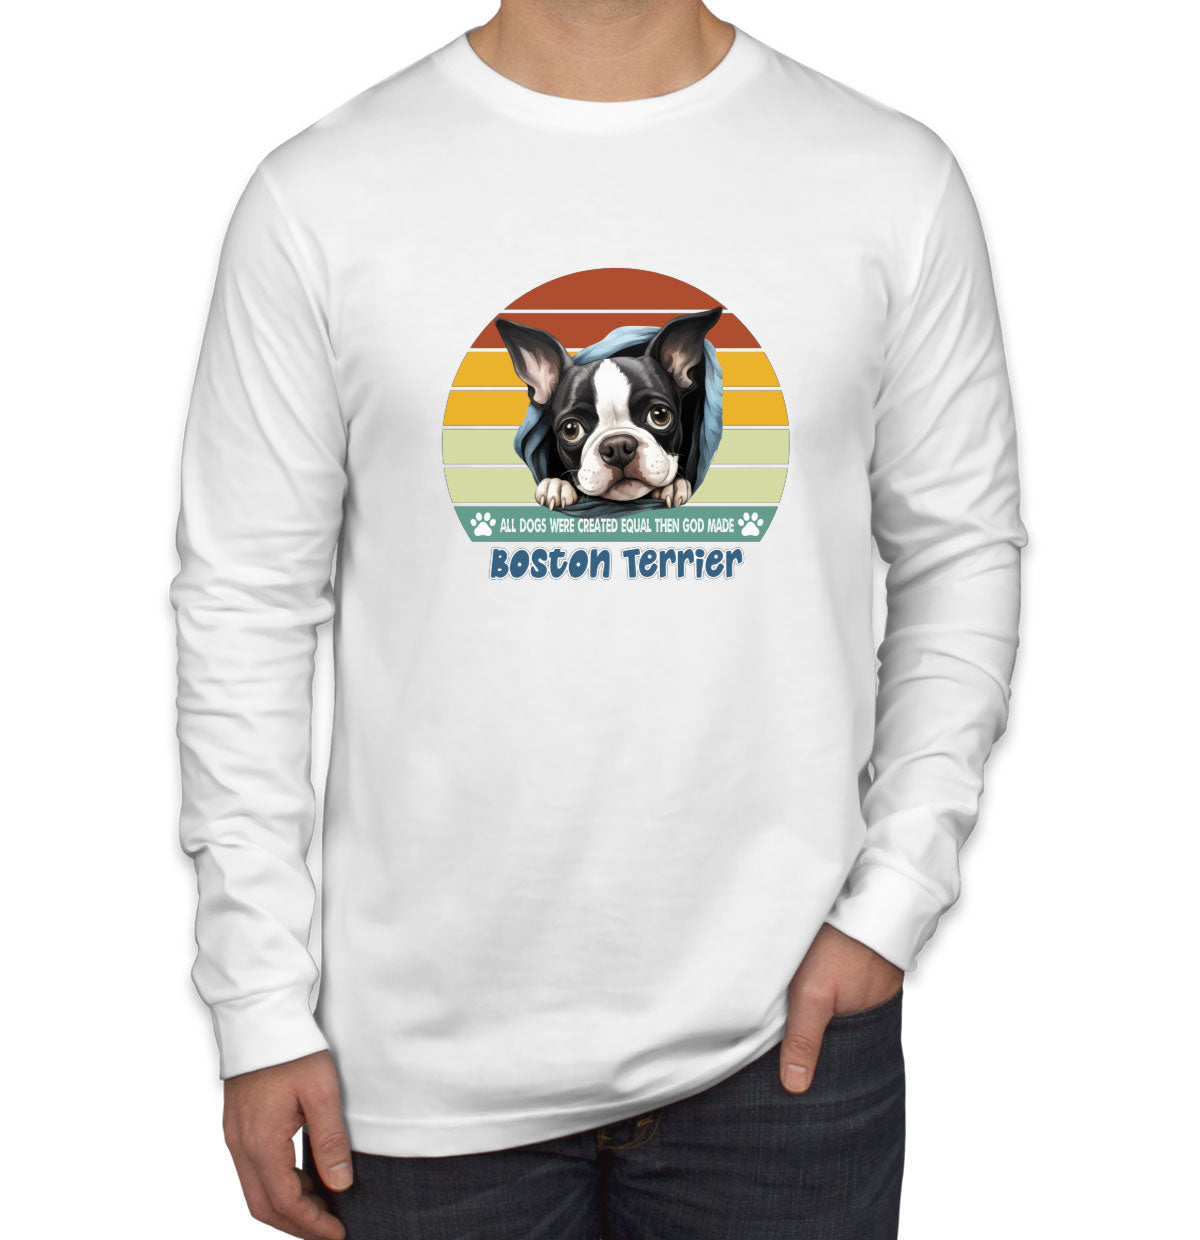 All Dogs Were Created Equal Boston Terrier Men's Long Sleeve Shirt